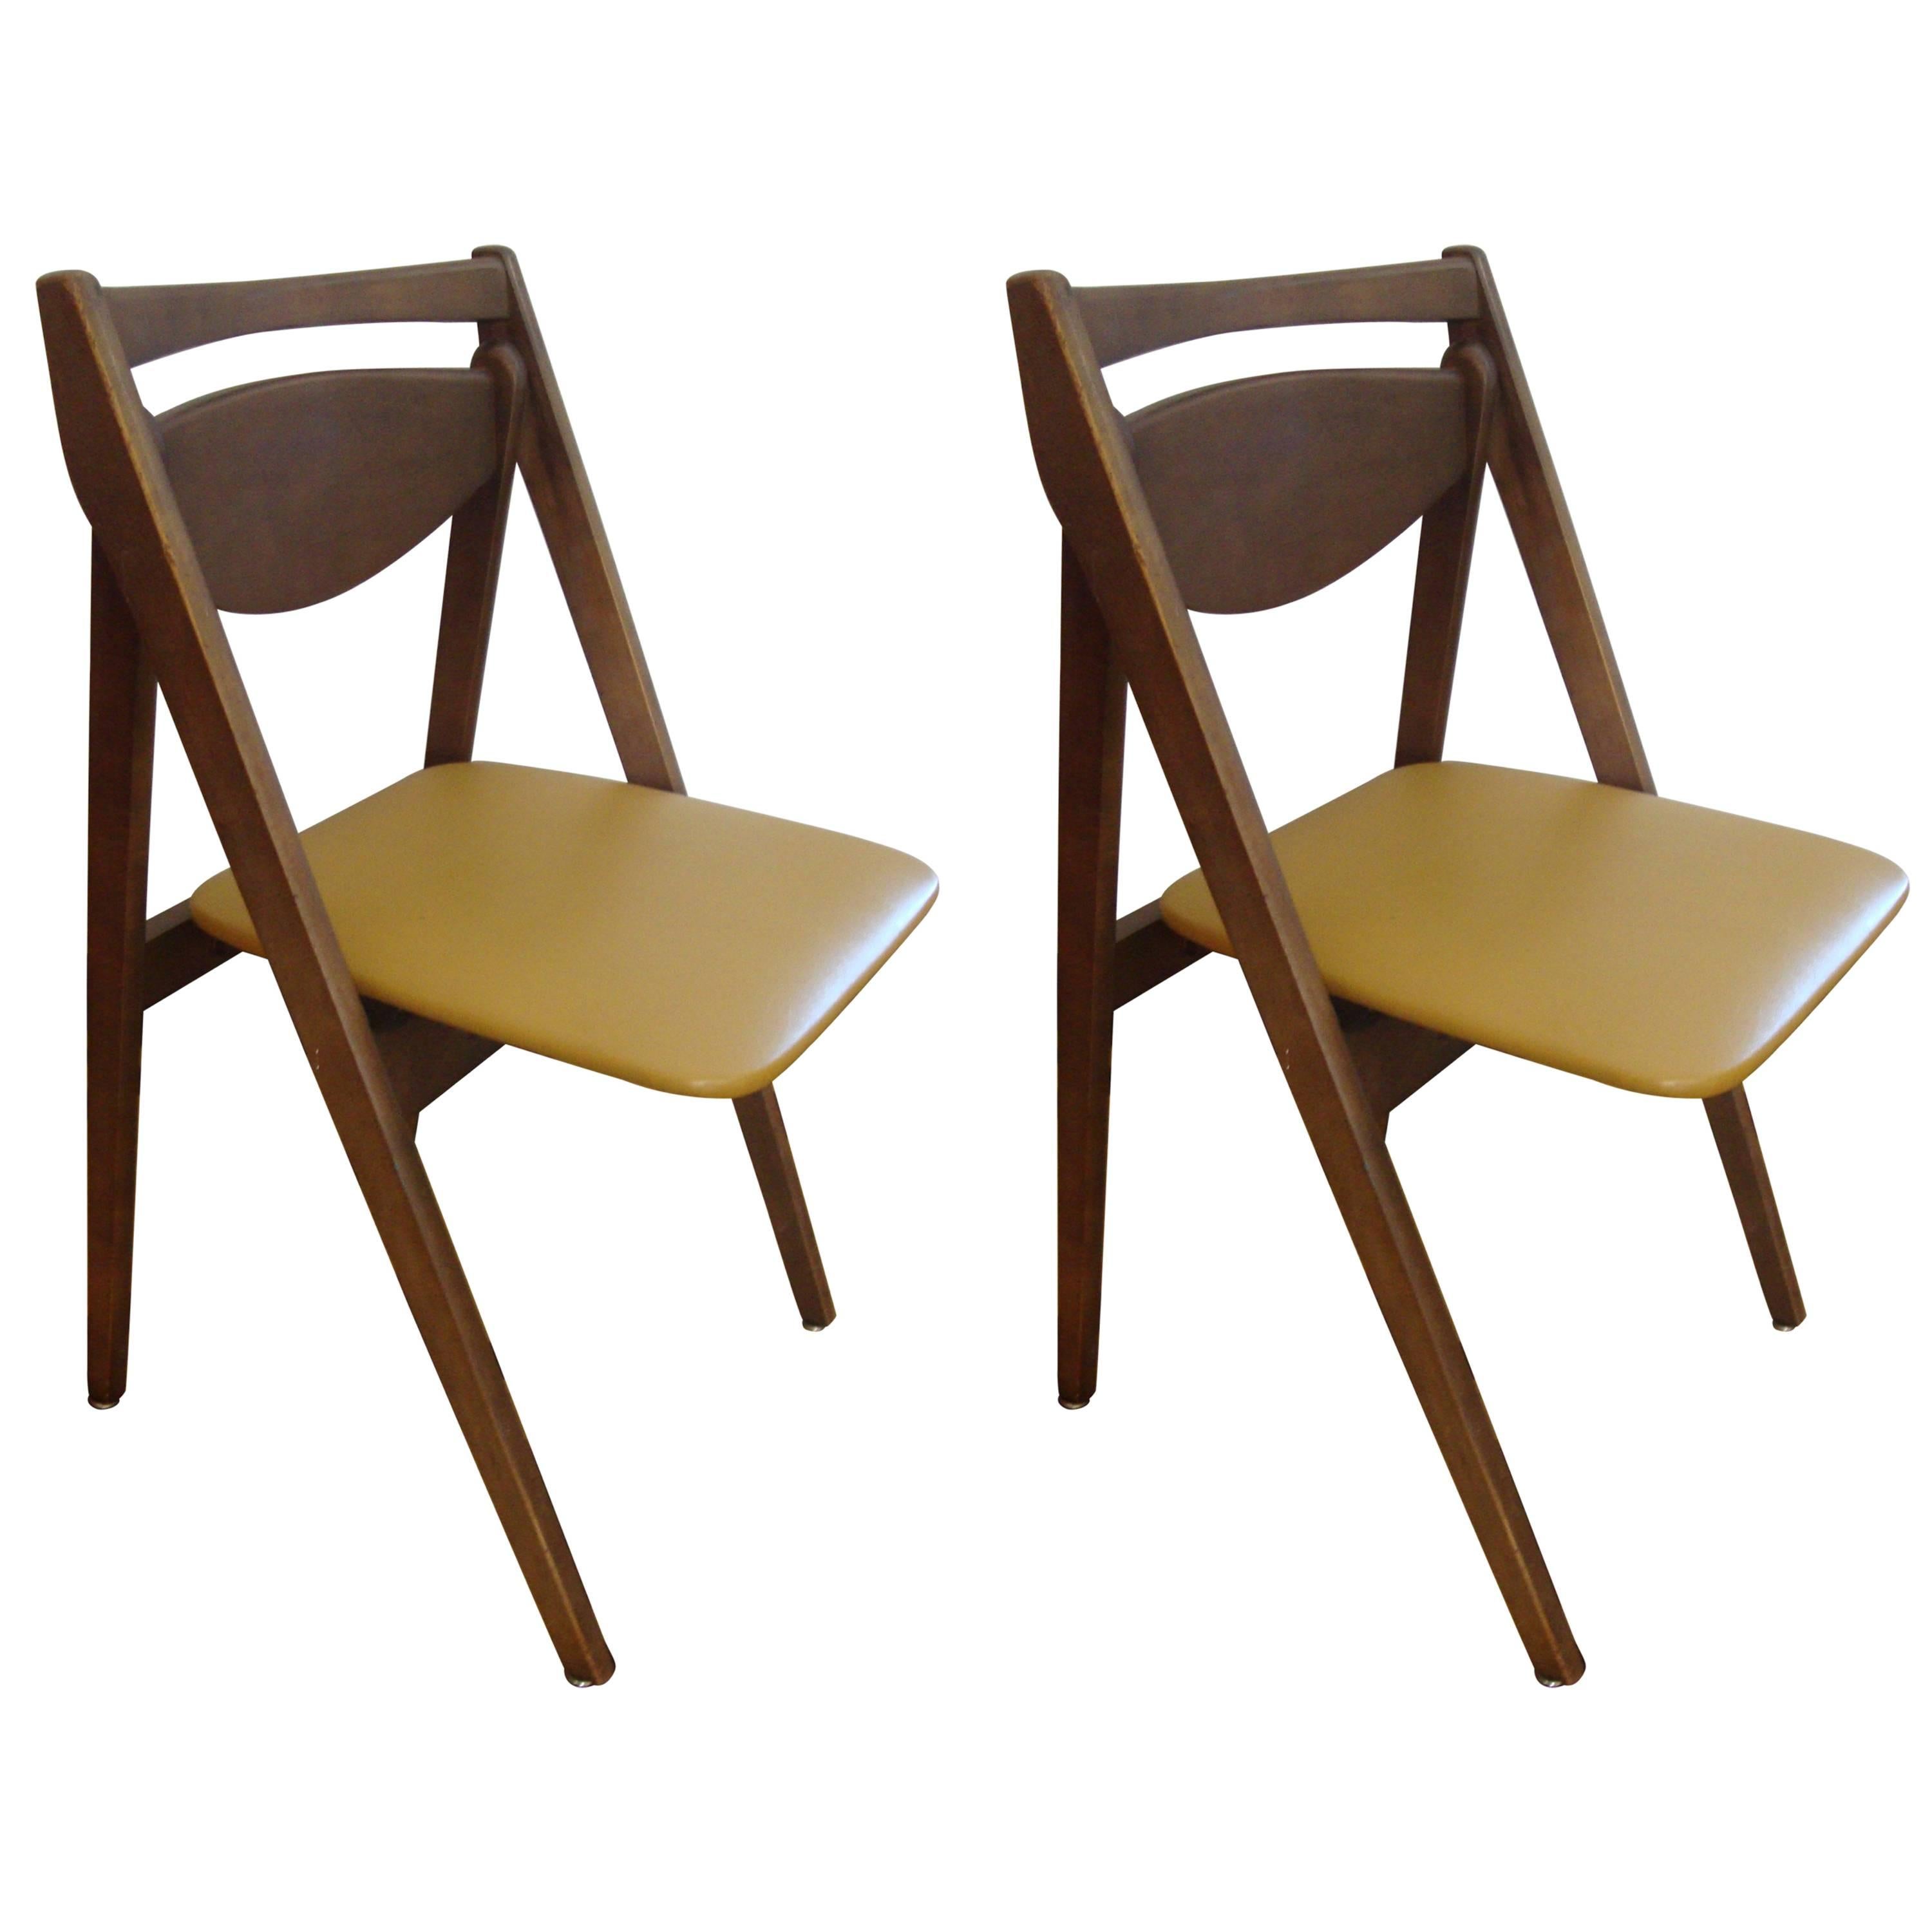 Fantastic Pair of 1950s Stakmore Leather and Walnut Folding Chairs